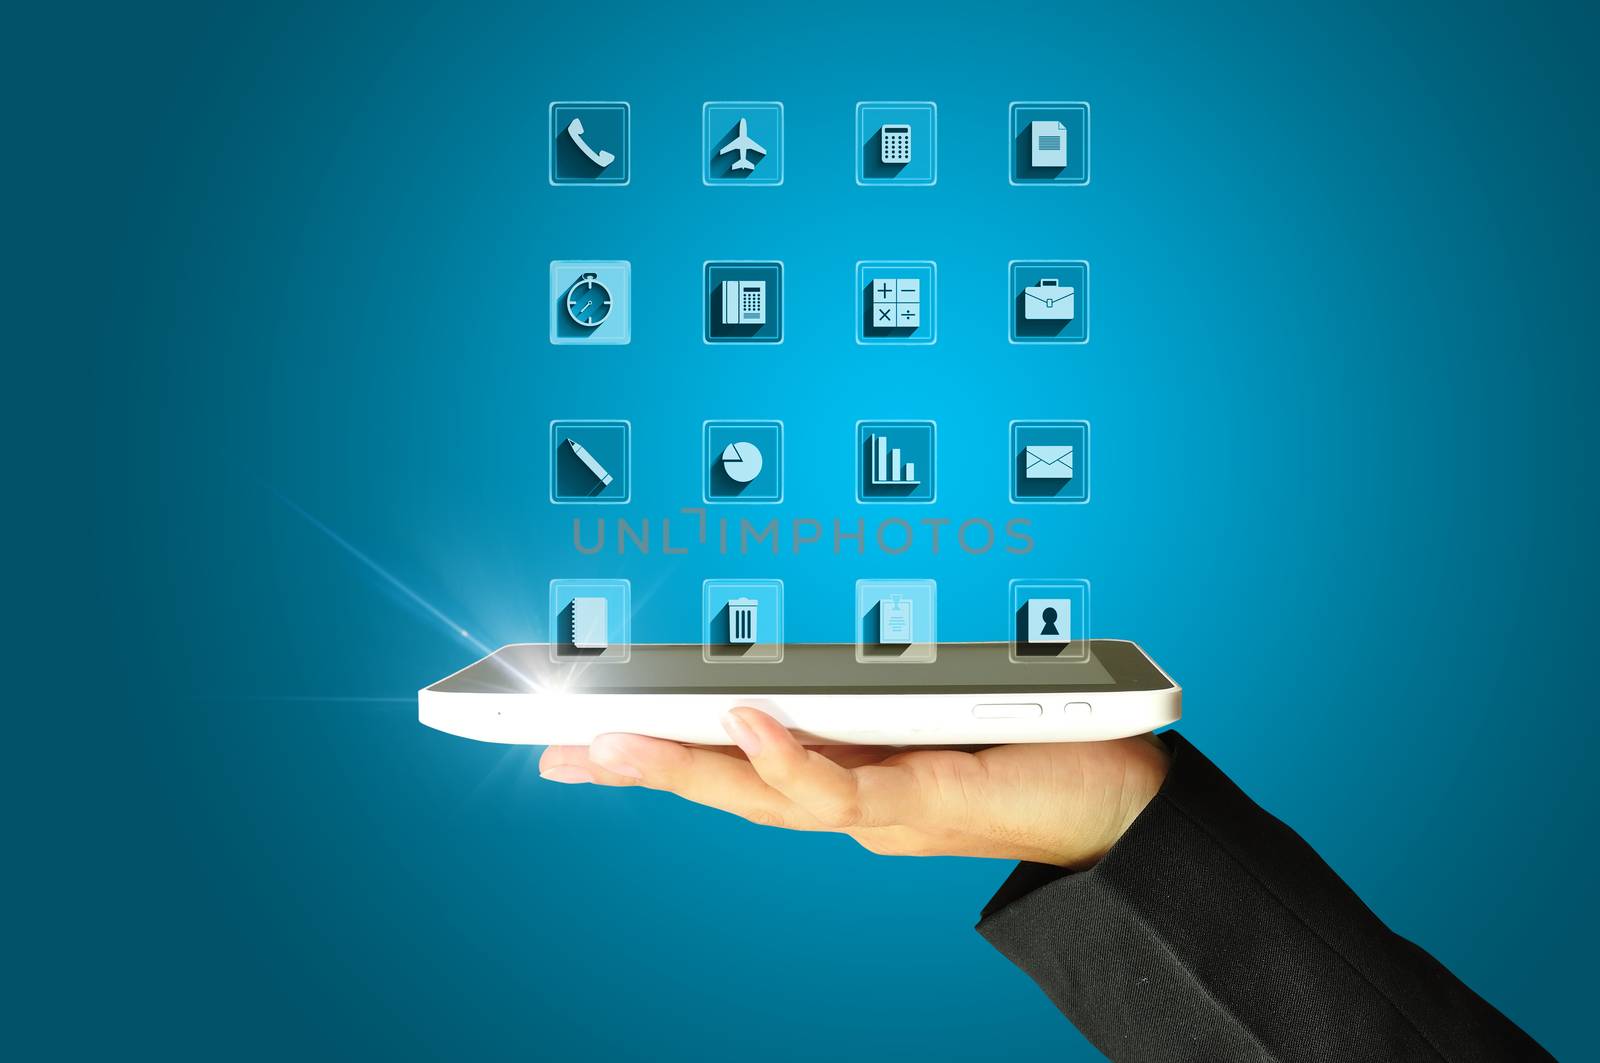 Woman hands holding tablet PC with application icons on blue background